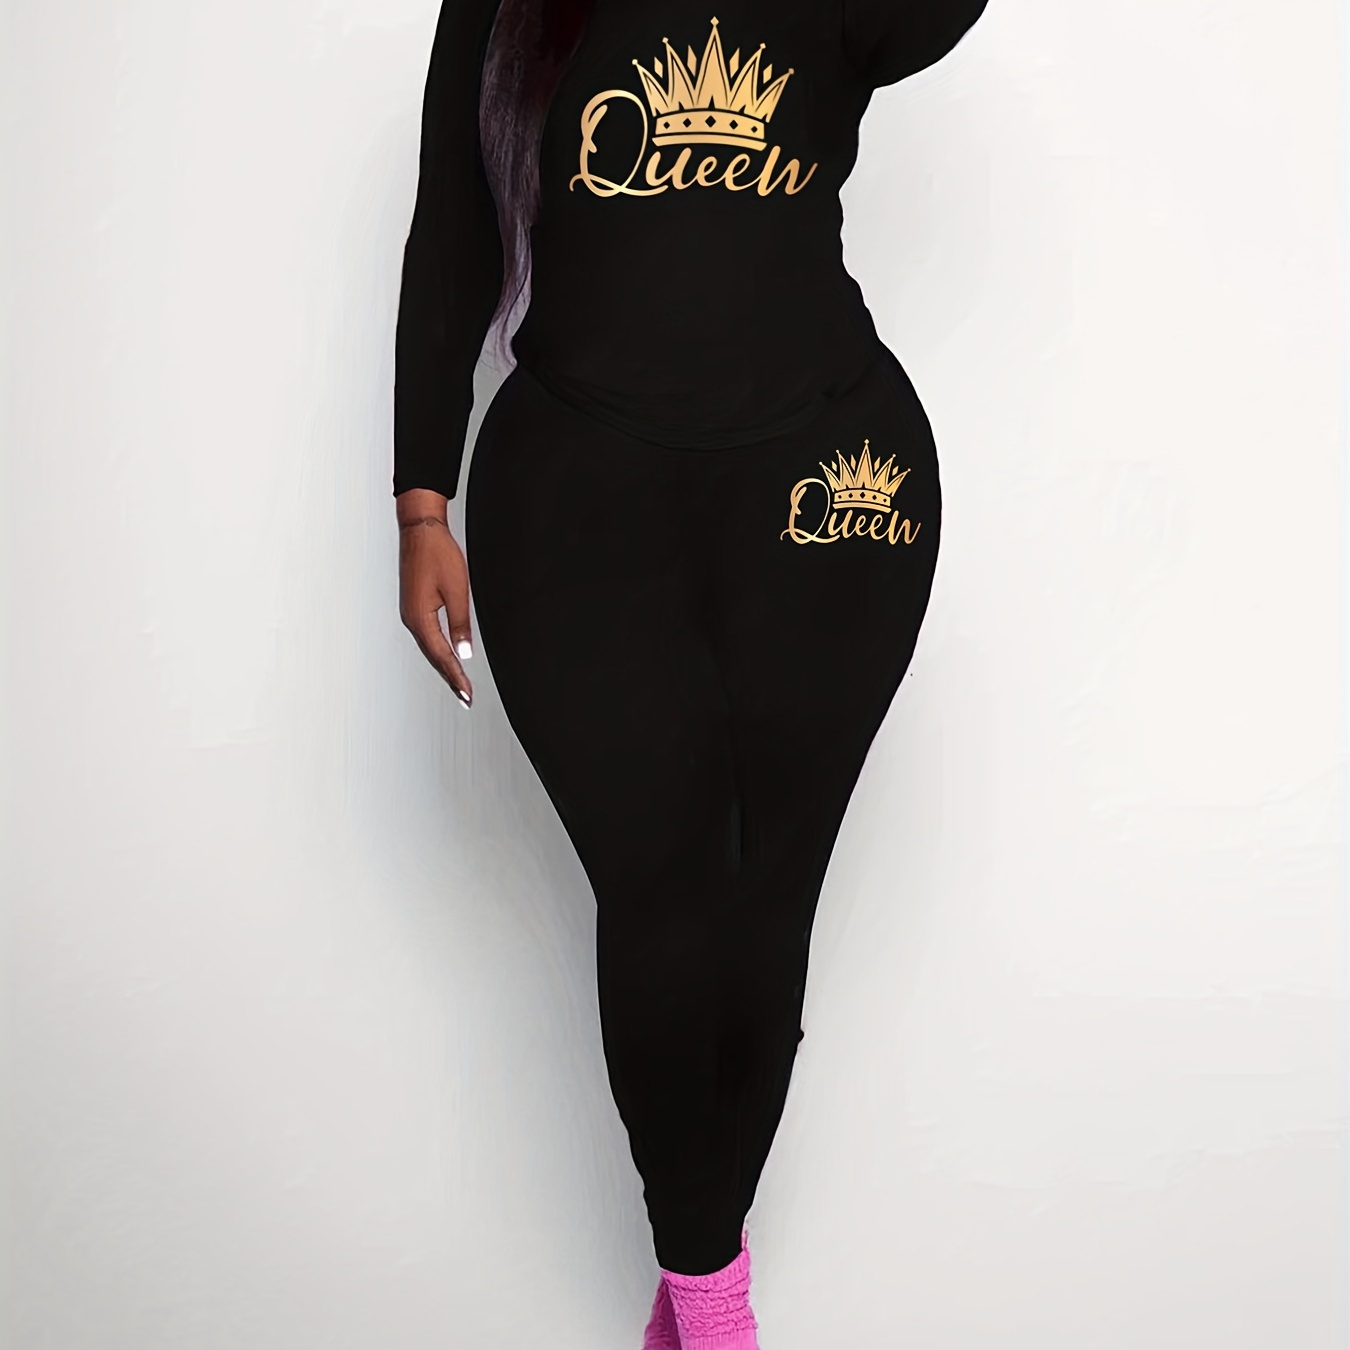 

Queen Crown Print Two-piece Set, Crew Neck Short Sleeve T-shirt & Skinny Leggings Outfits, Women's Clothing